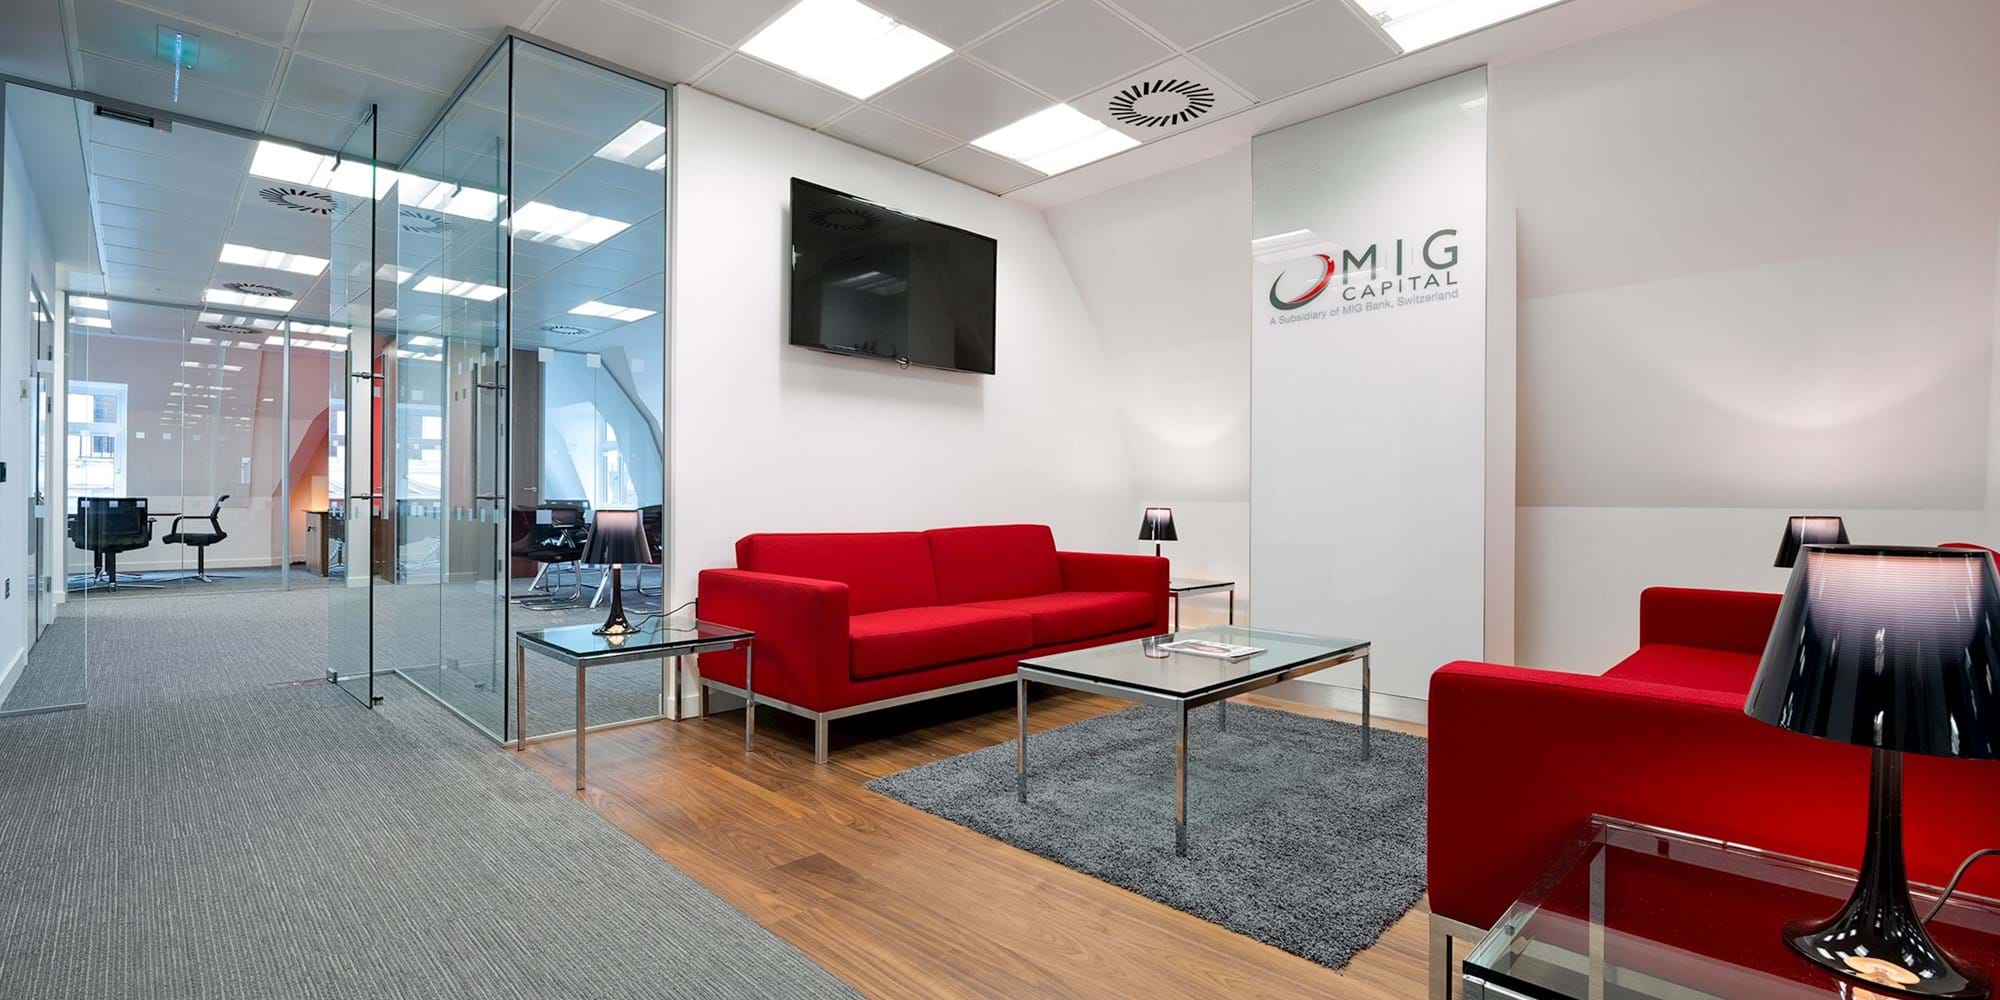 Modus Workspace office design, fit out and refurbishment - MIG Capital - Breakout - Mig_Capital 02_highres_sRGB.jpg